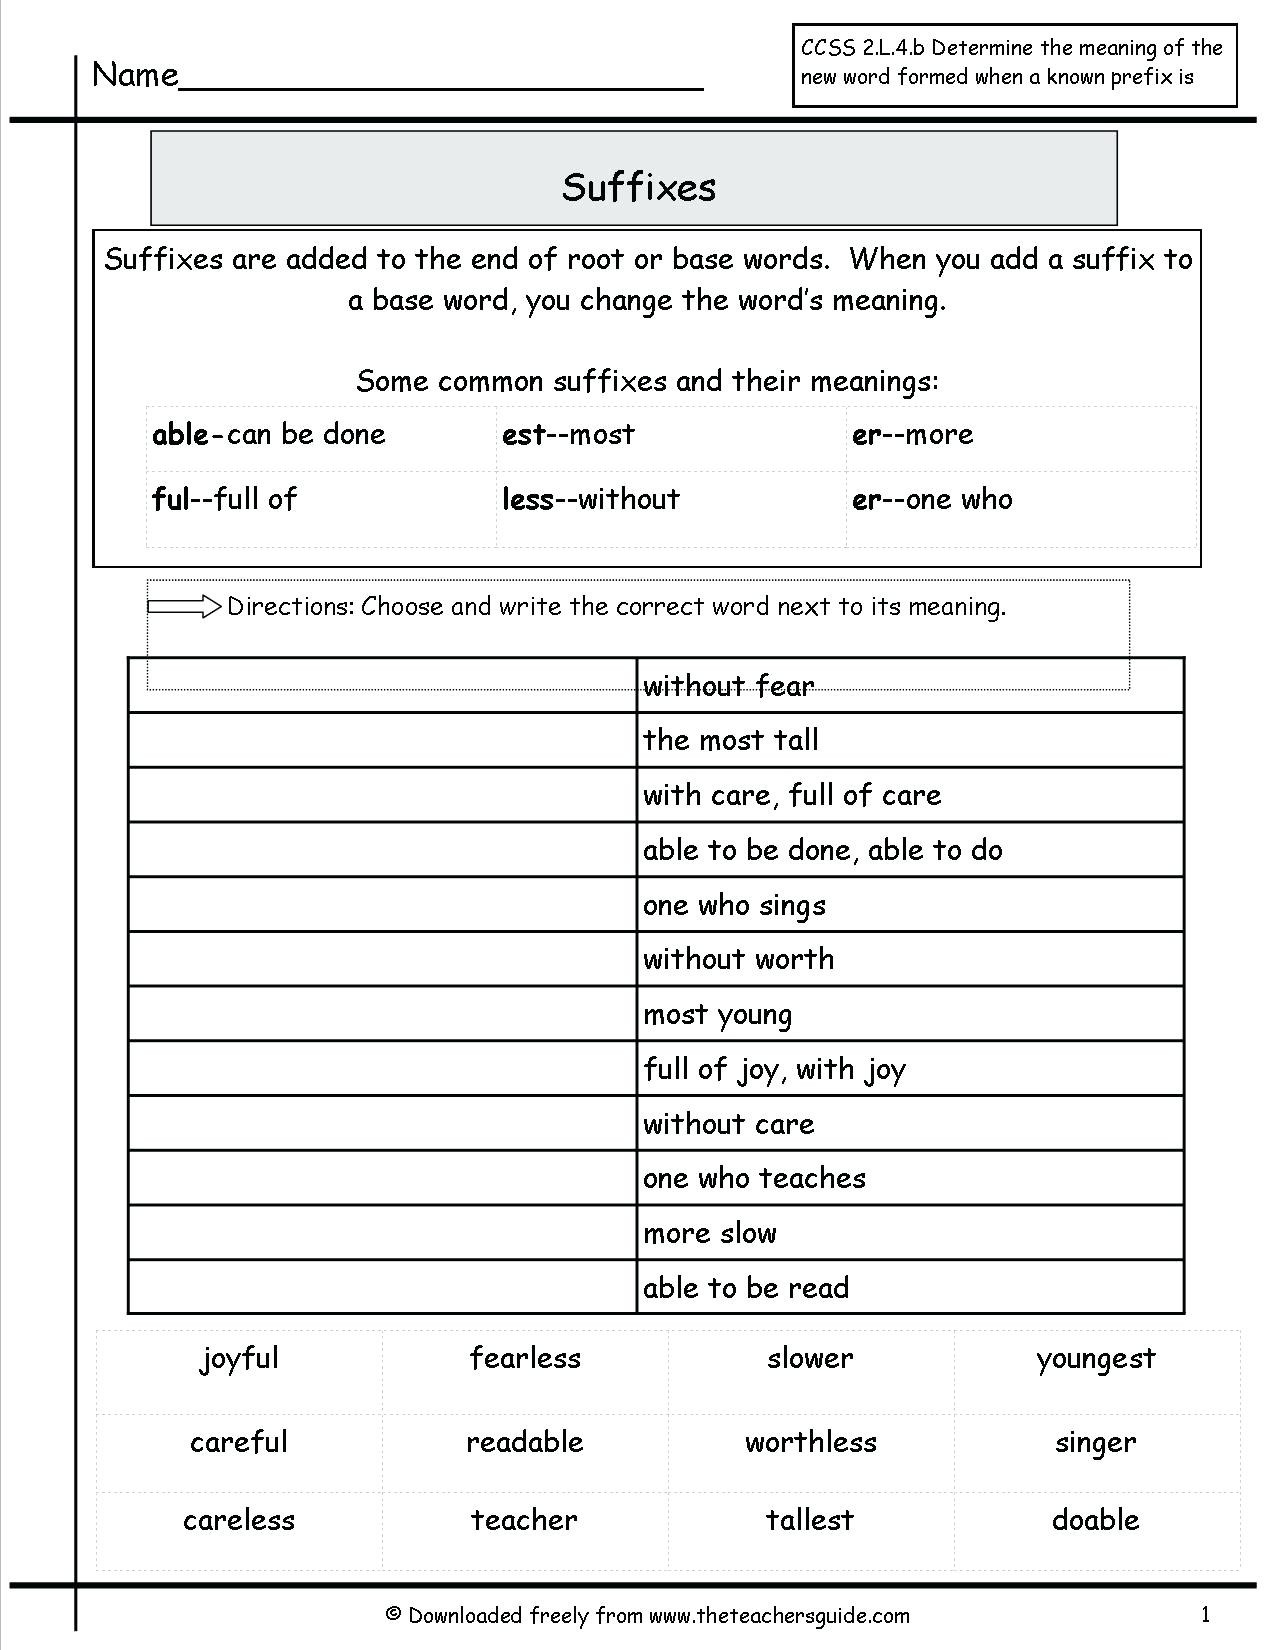 Suffixes Worksheets for 3rd Grade 3rd Grade Prefixes and Suffixes Worksheets Root Words